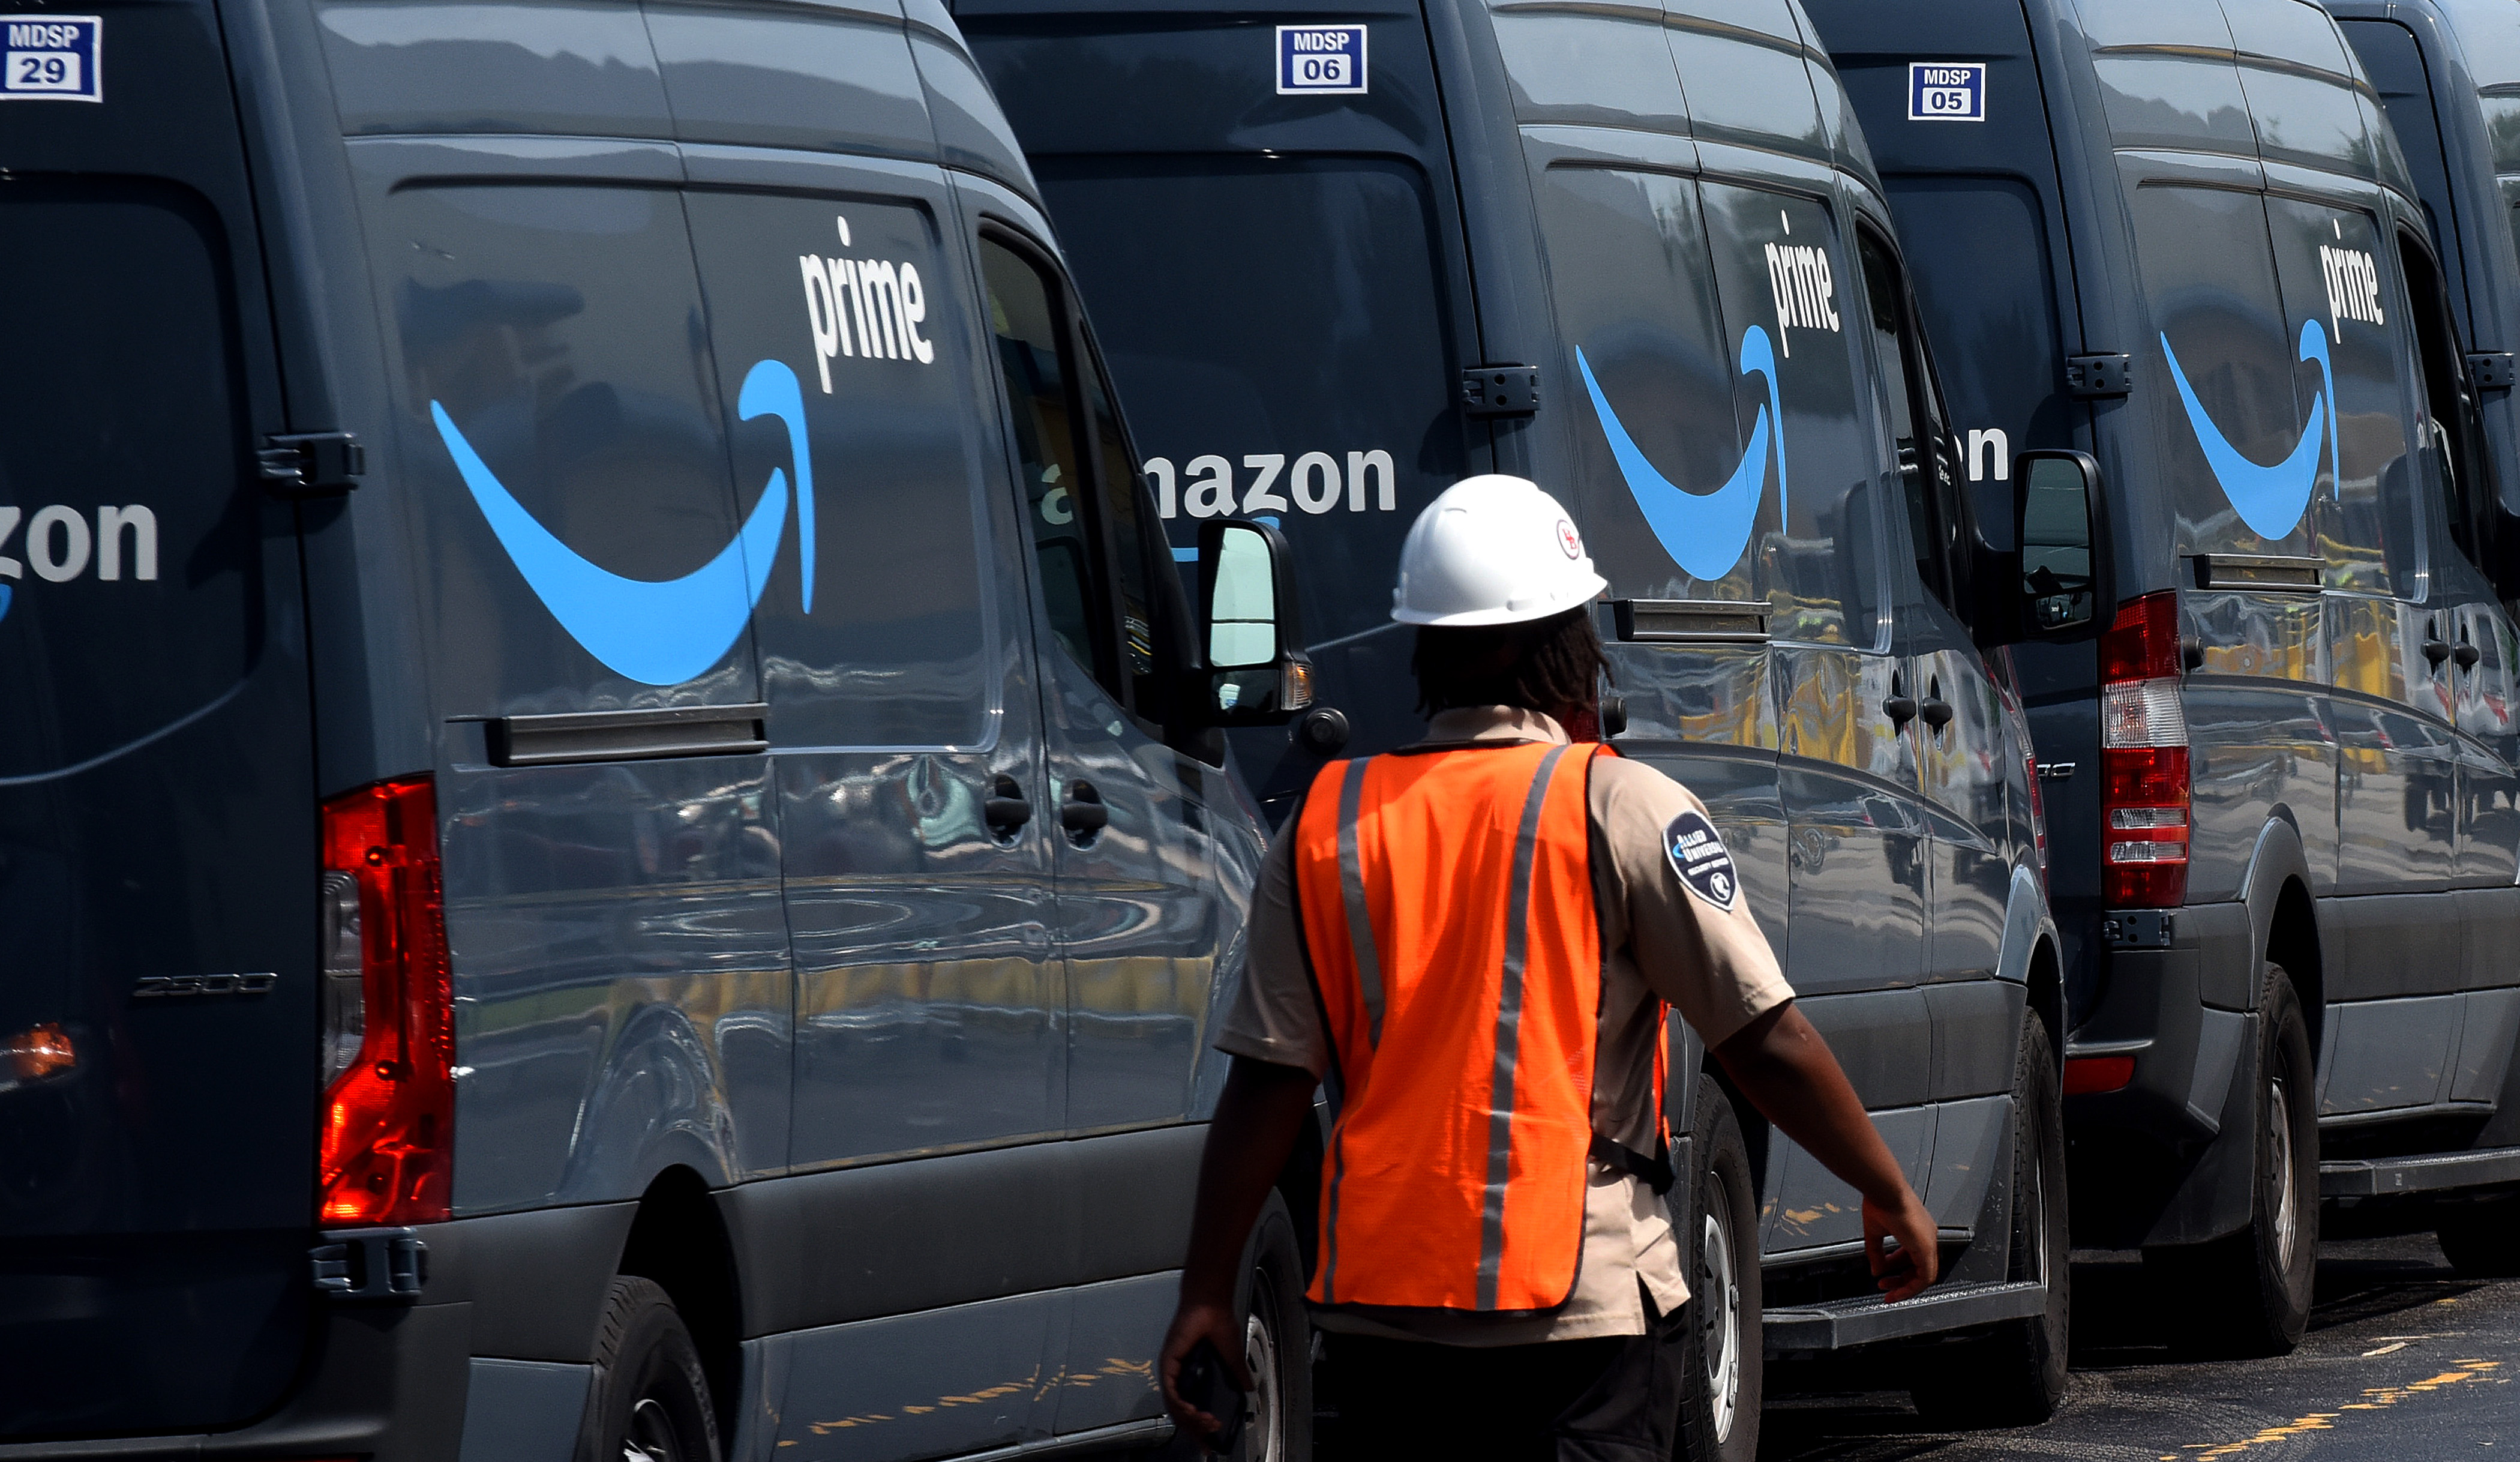 A worker walking past a line of Amazon Prime delivery vans.